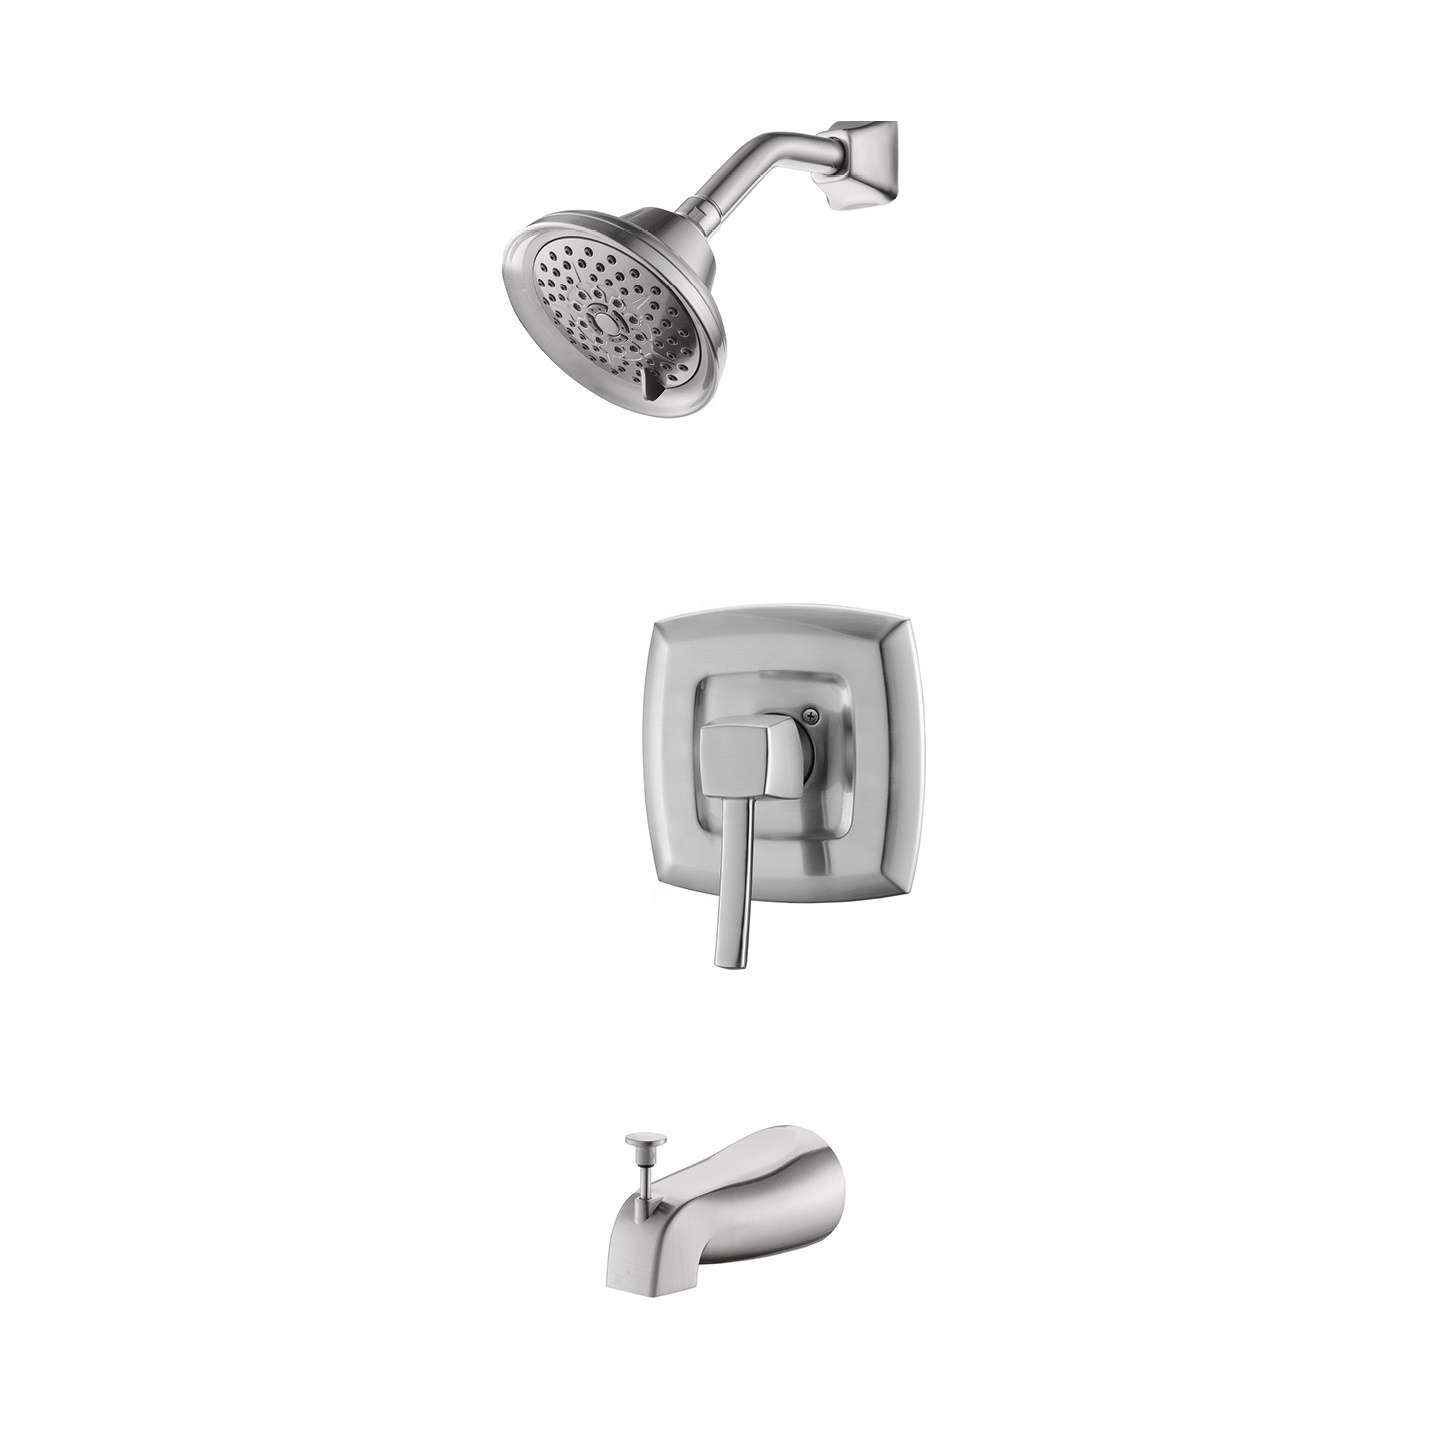 Tub Faucet Wall Mount Brushed Nickel Brass Shower Faucet Bathroom Shower Set Faucet